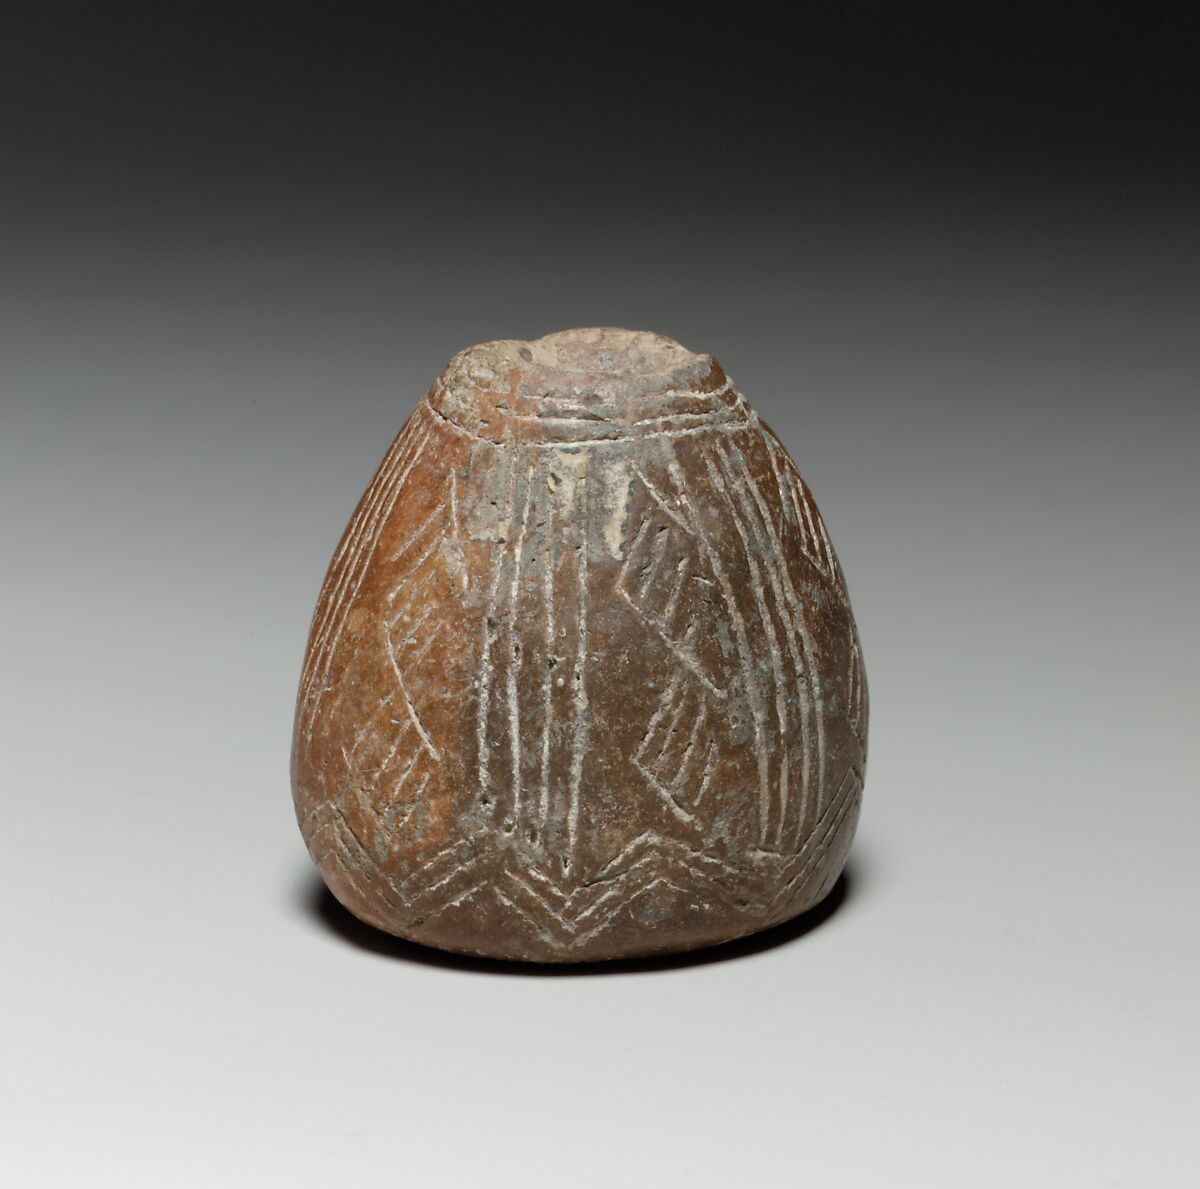 Terracotta conical-hemispherical spindle-whorl, Terracotta, Cypriot 